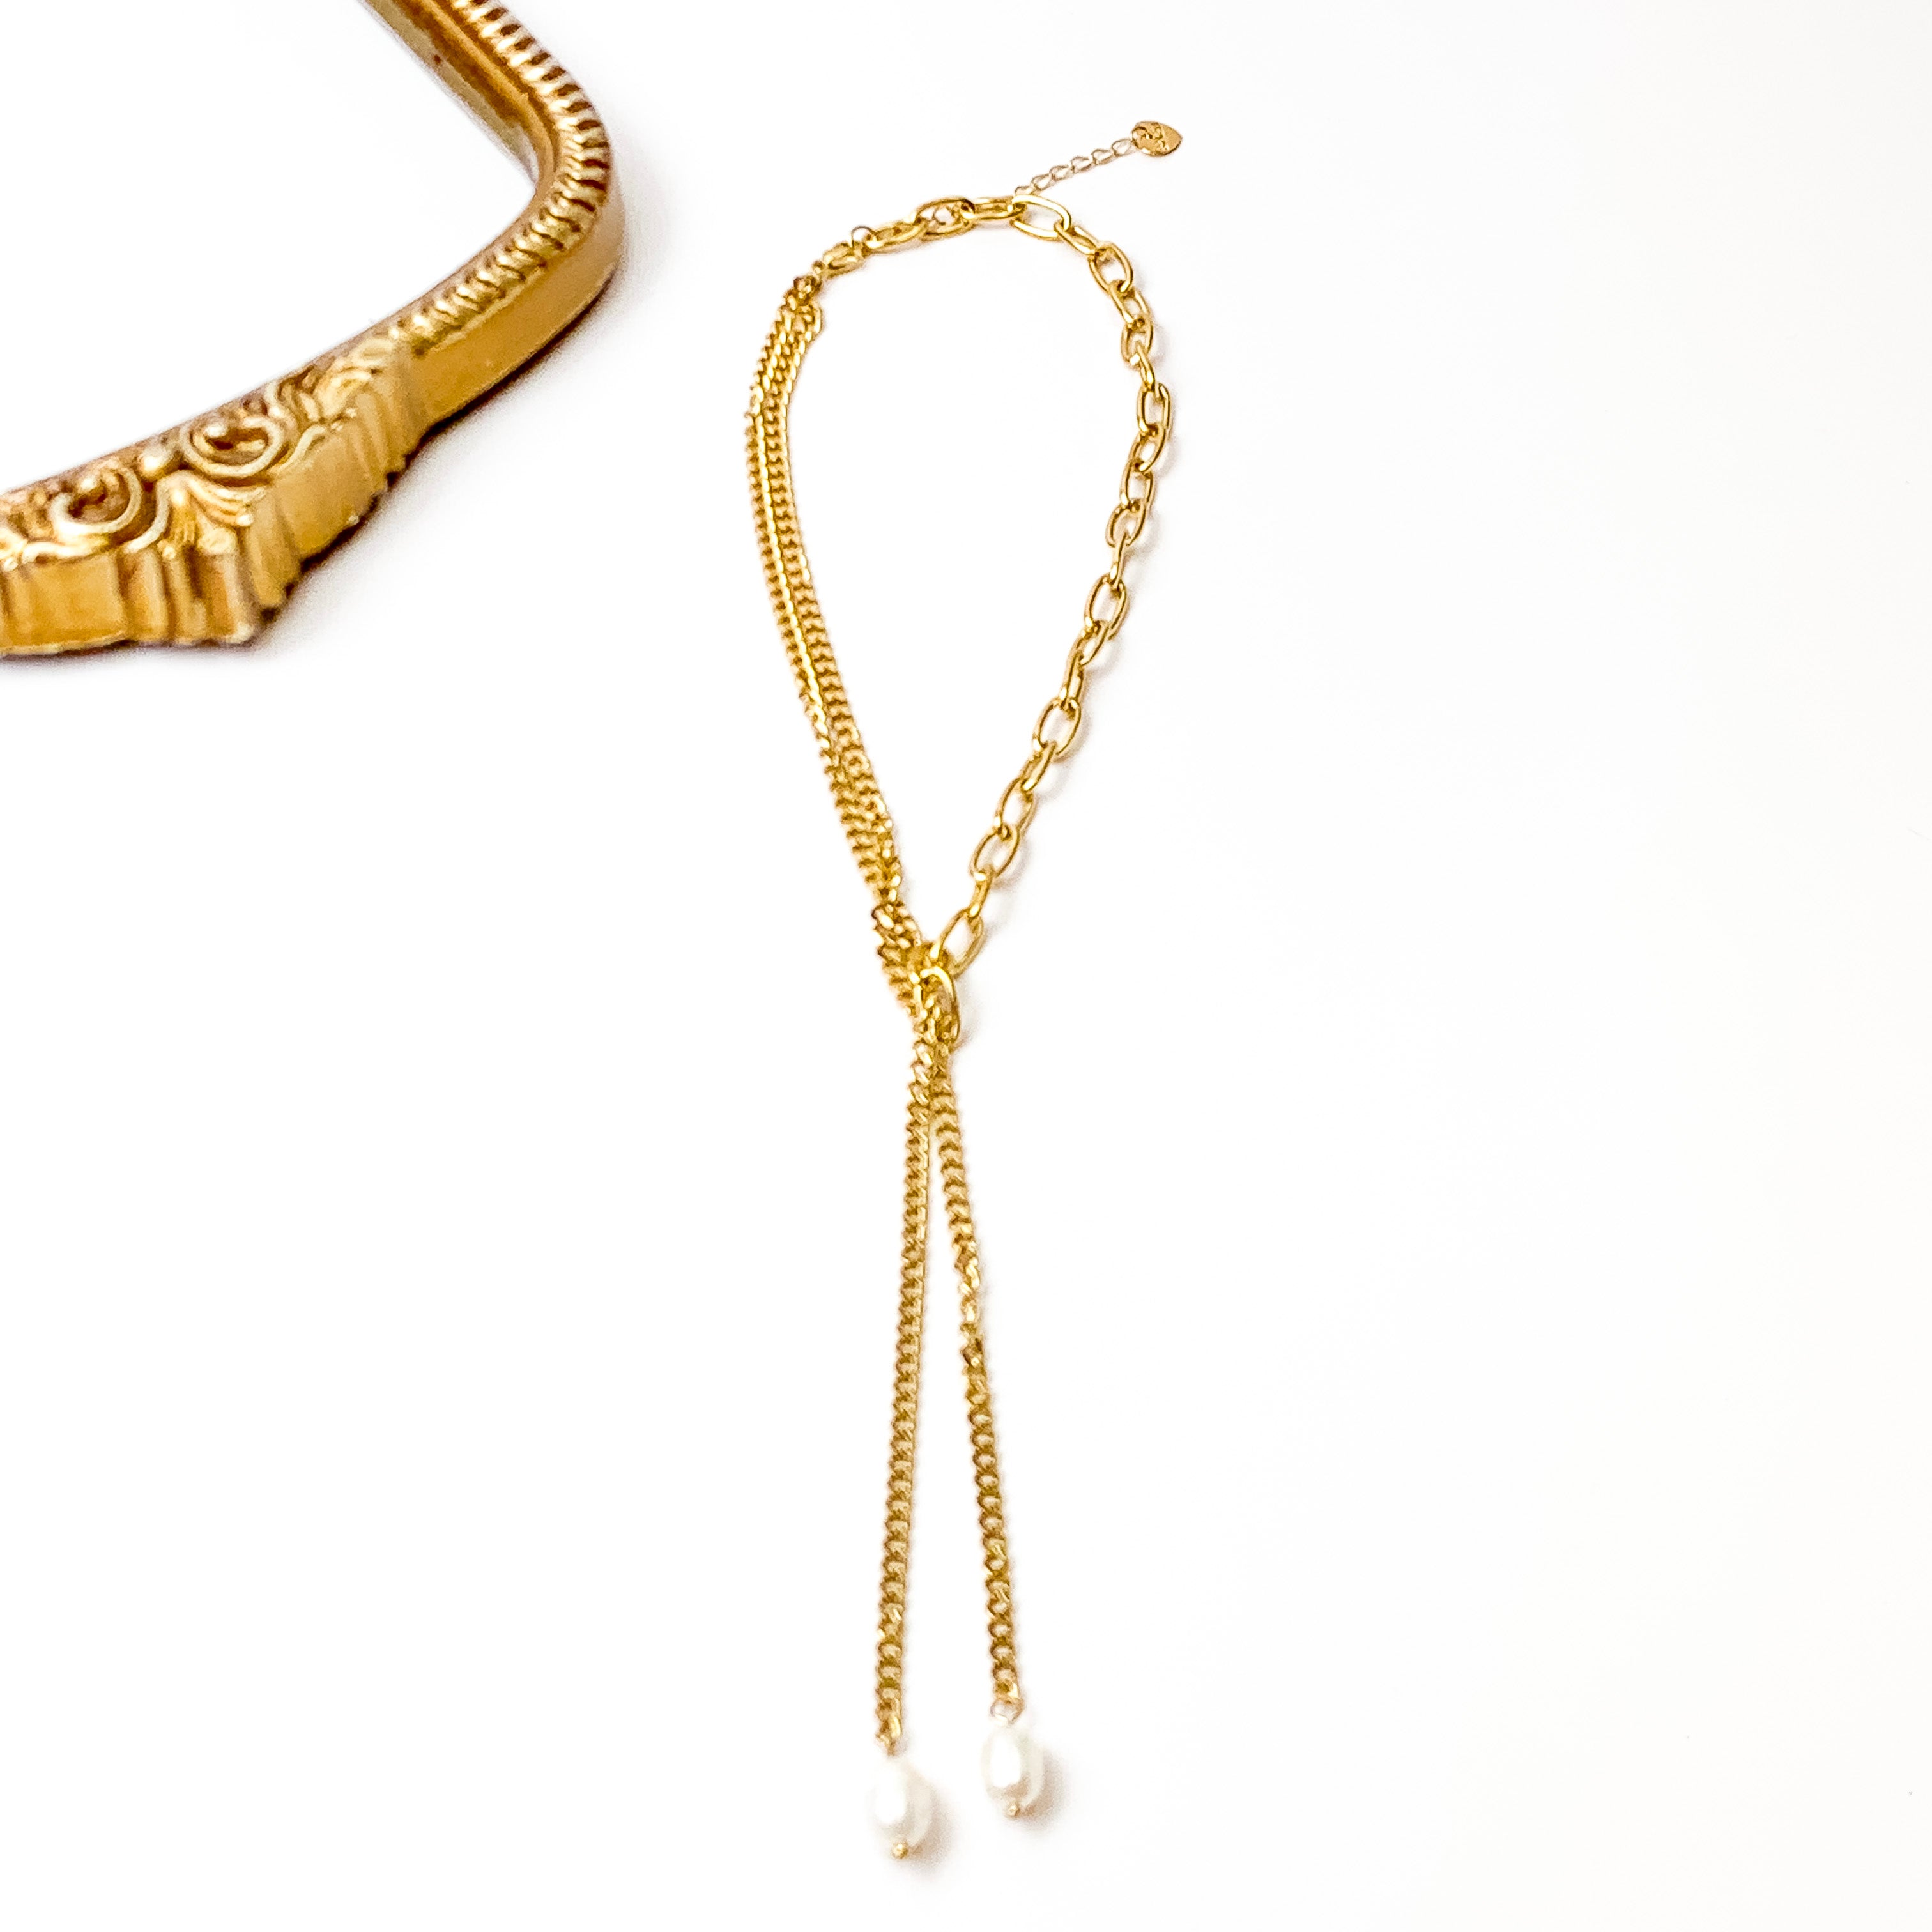 Bracha | Teresa Necklace in Gold Tone - Giddy Up Glamour Boutique